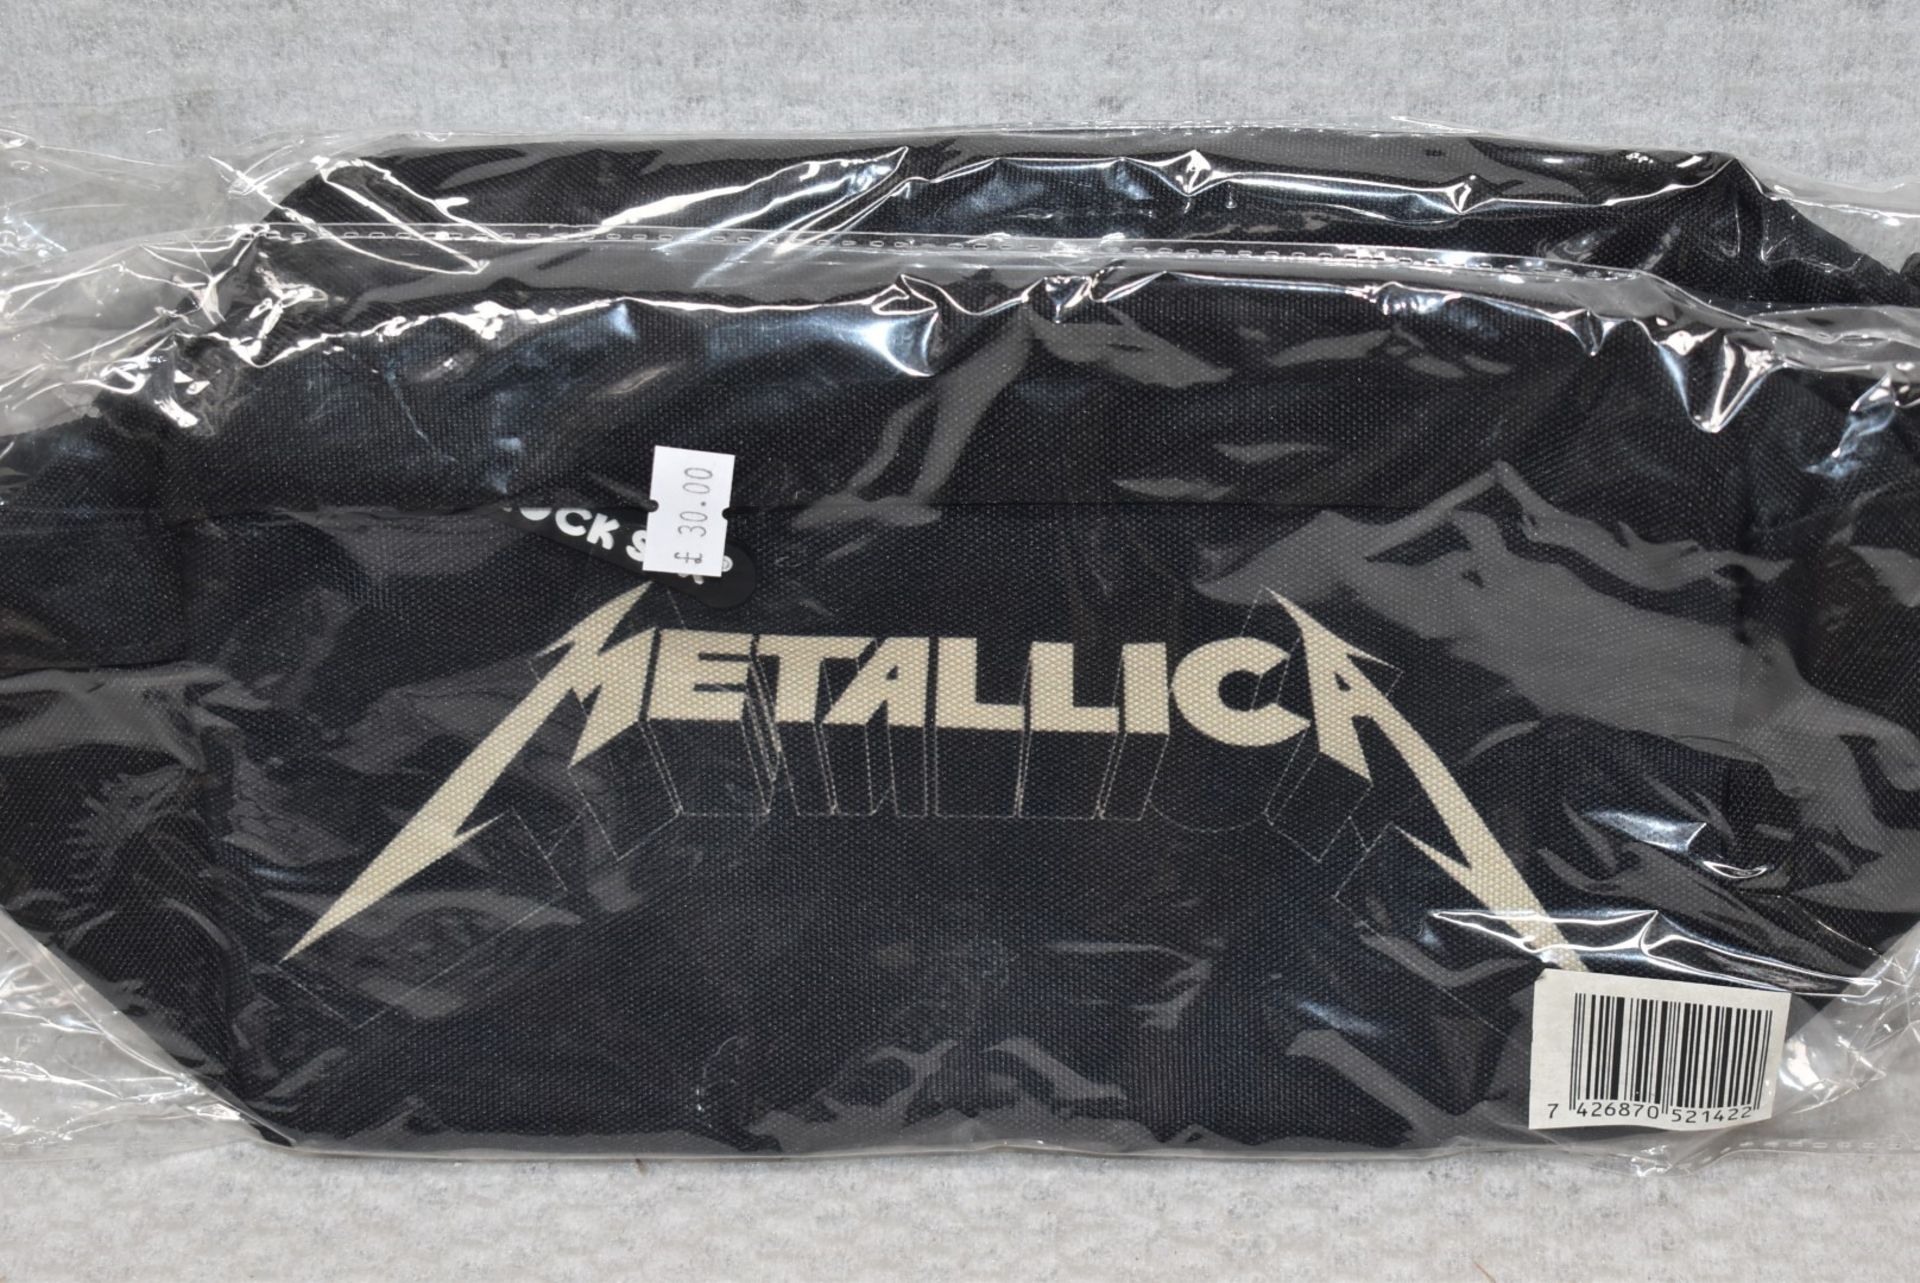 1 x Metallica Travellers Wash Bag by Rock Sax - Officially Licensed Merchandise - New & Unused - - Image 2 of 4